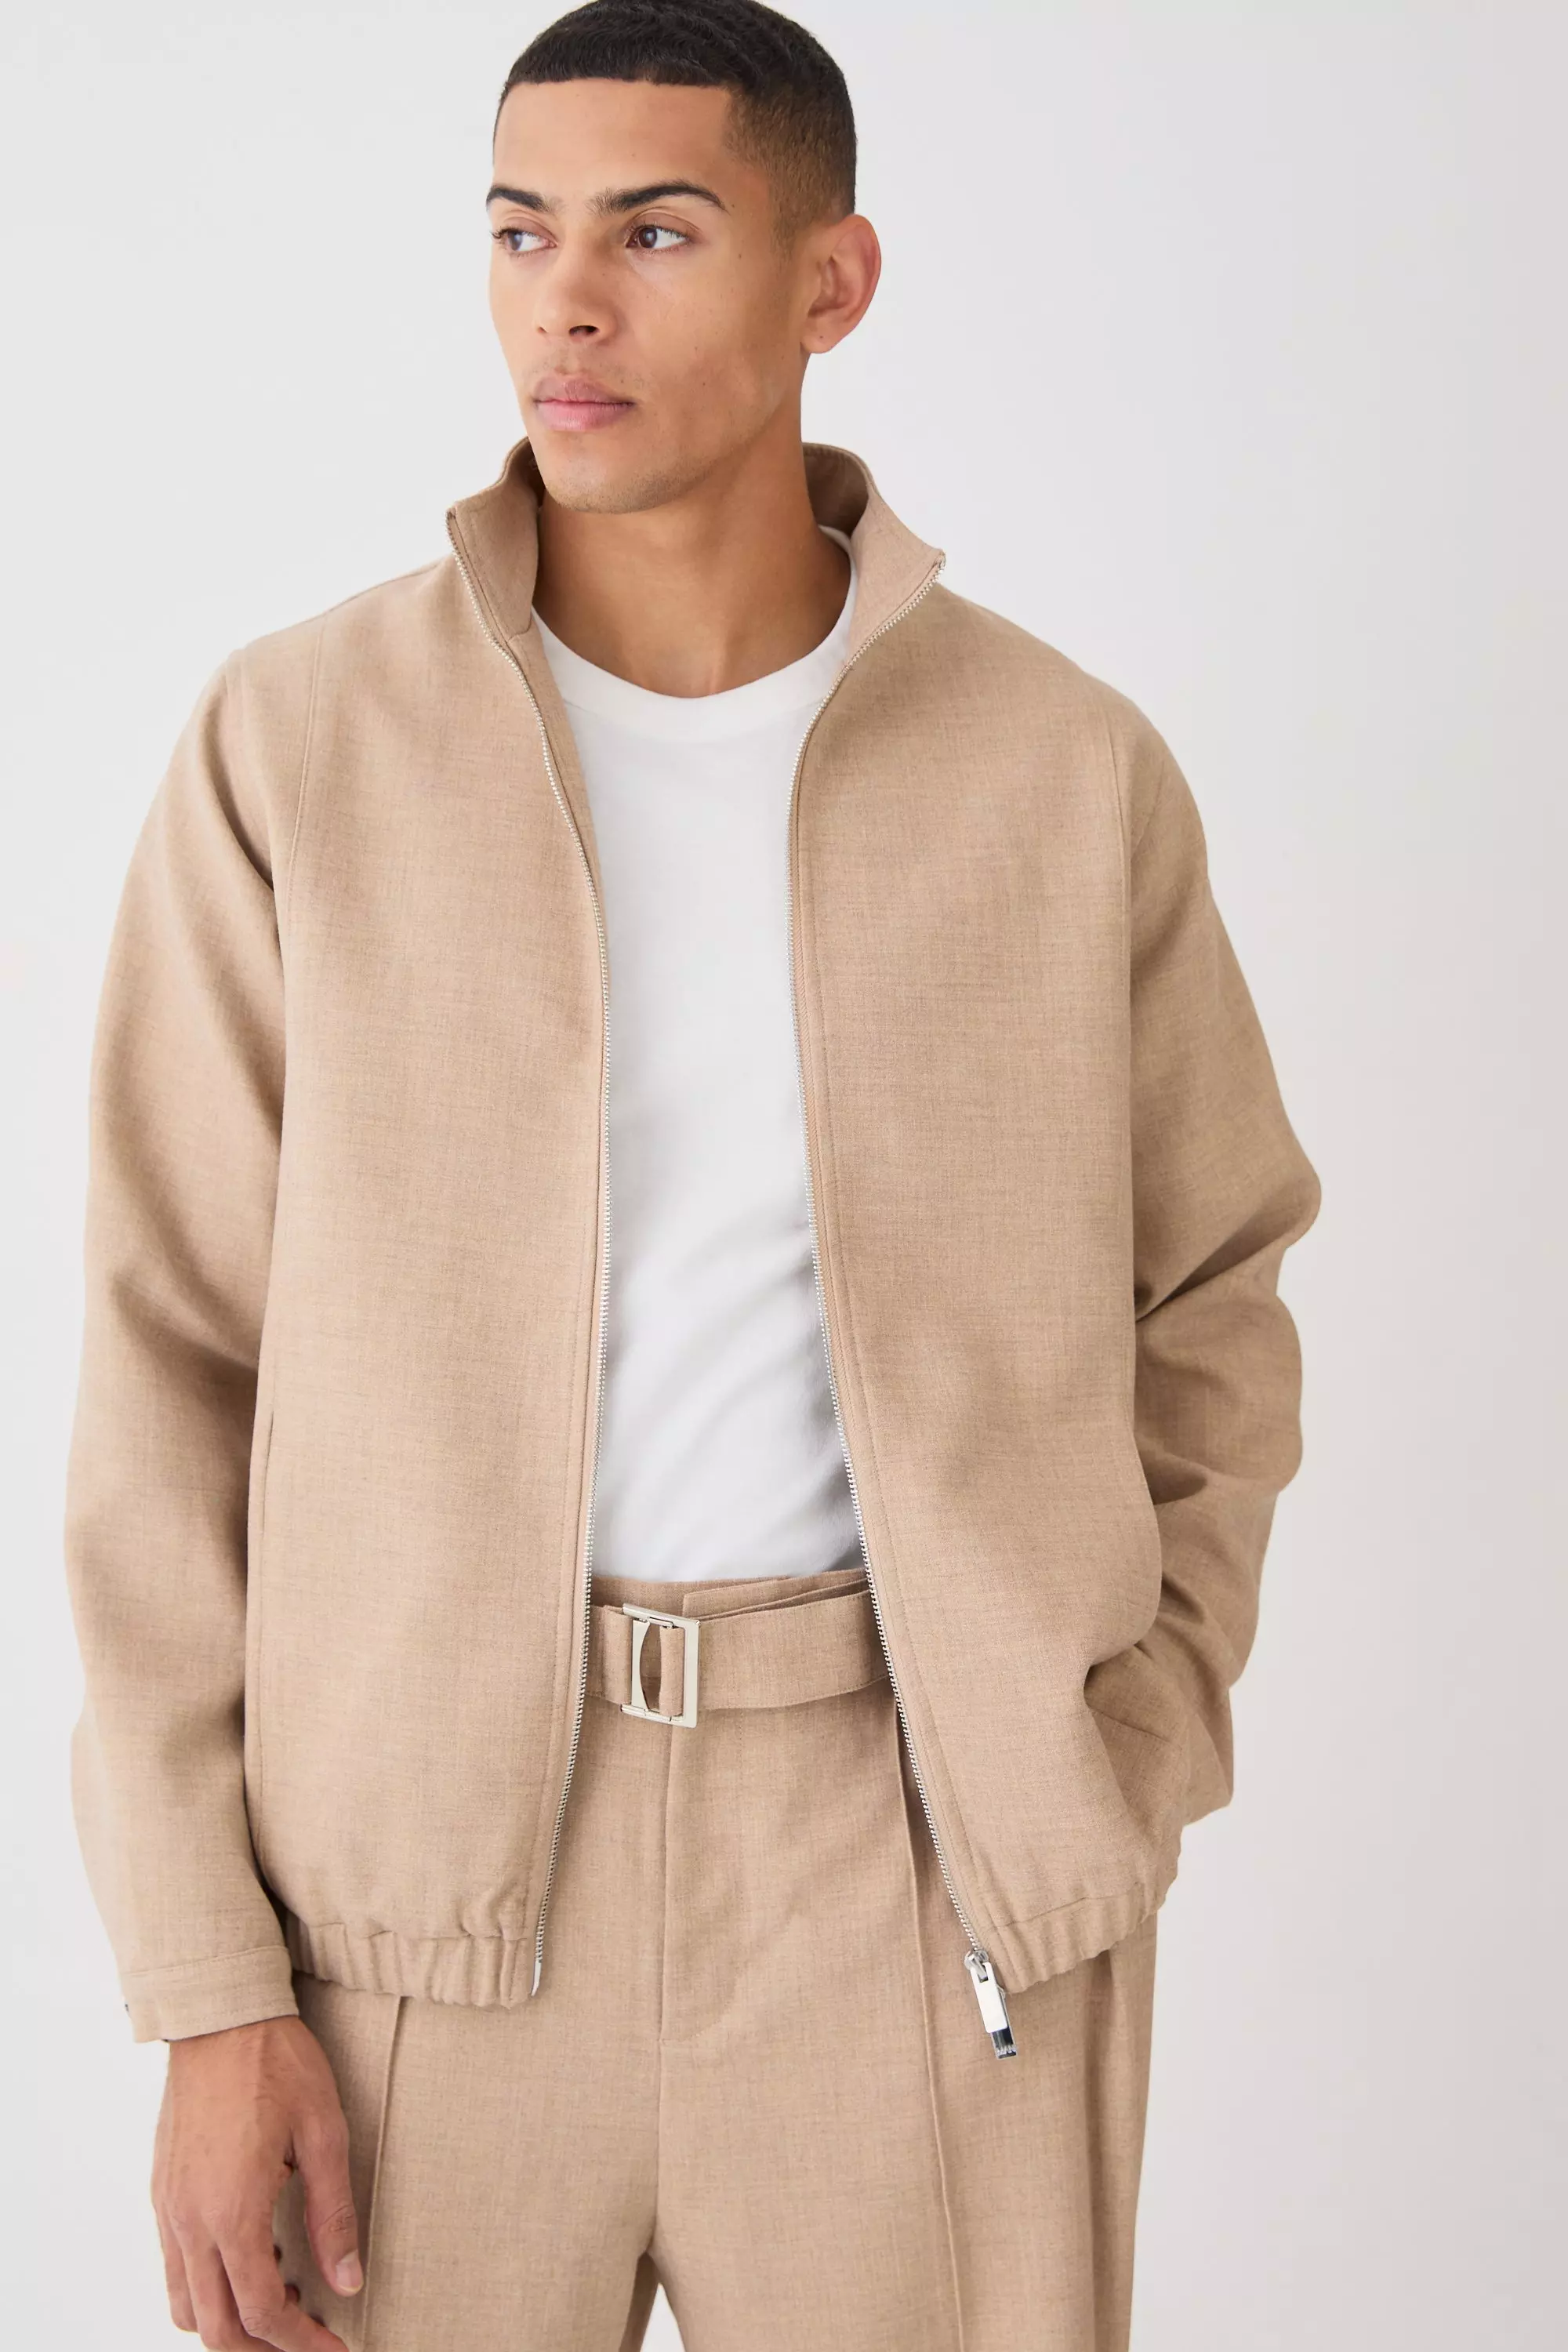 Taupe Beige Textured Tailored Funnel Neck Jacket